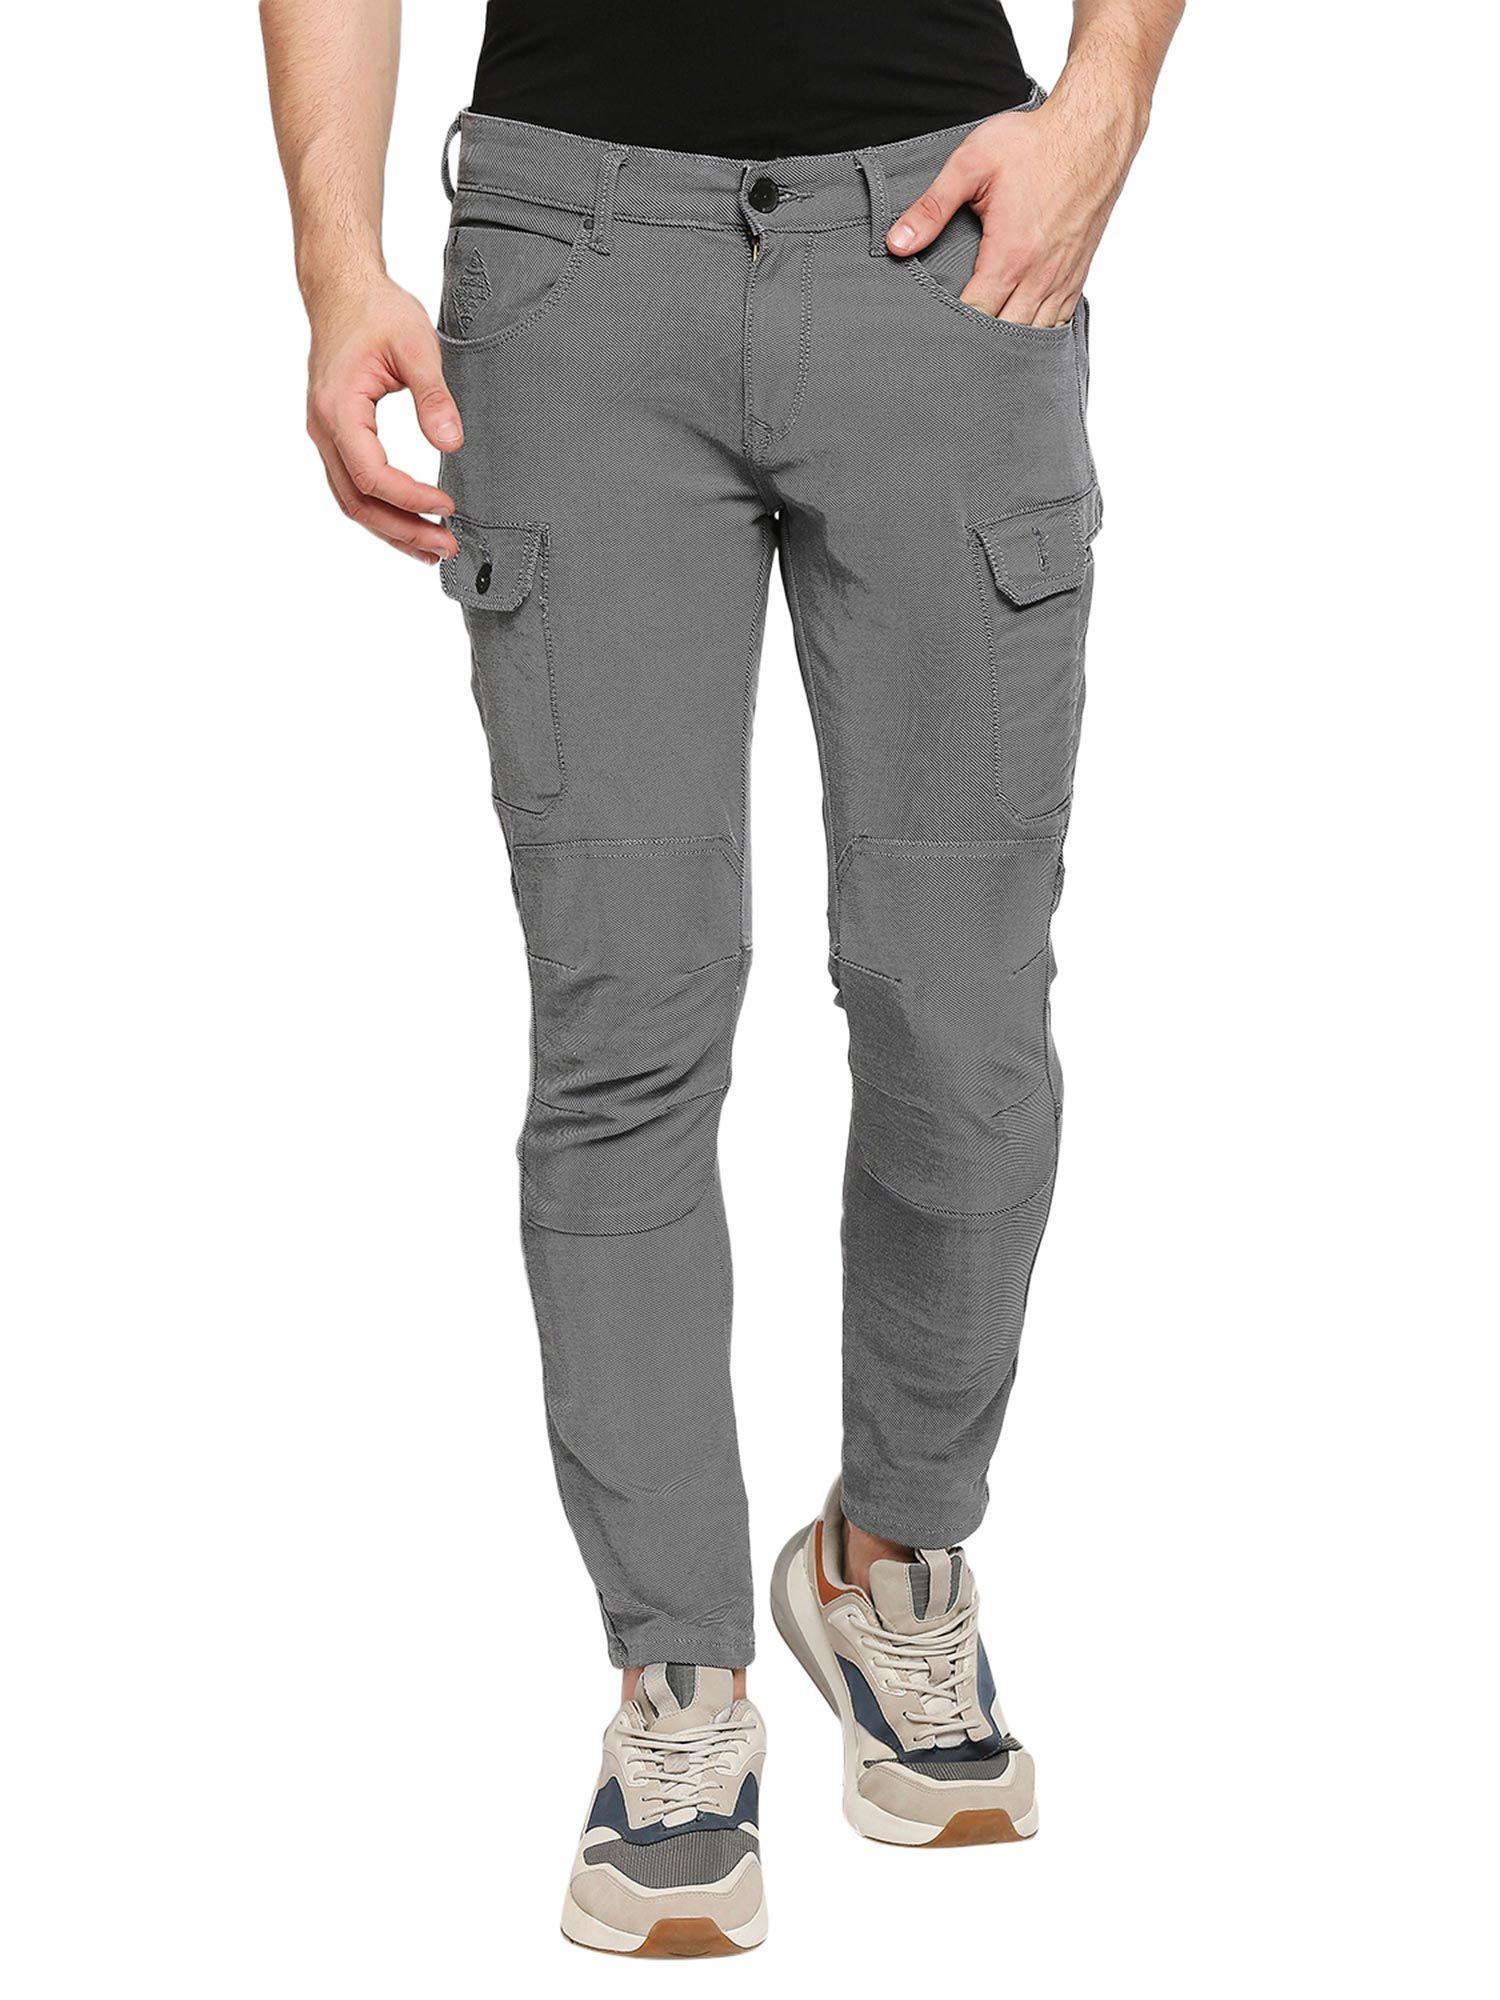 men's tapered fit washed grey jeans